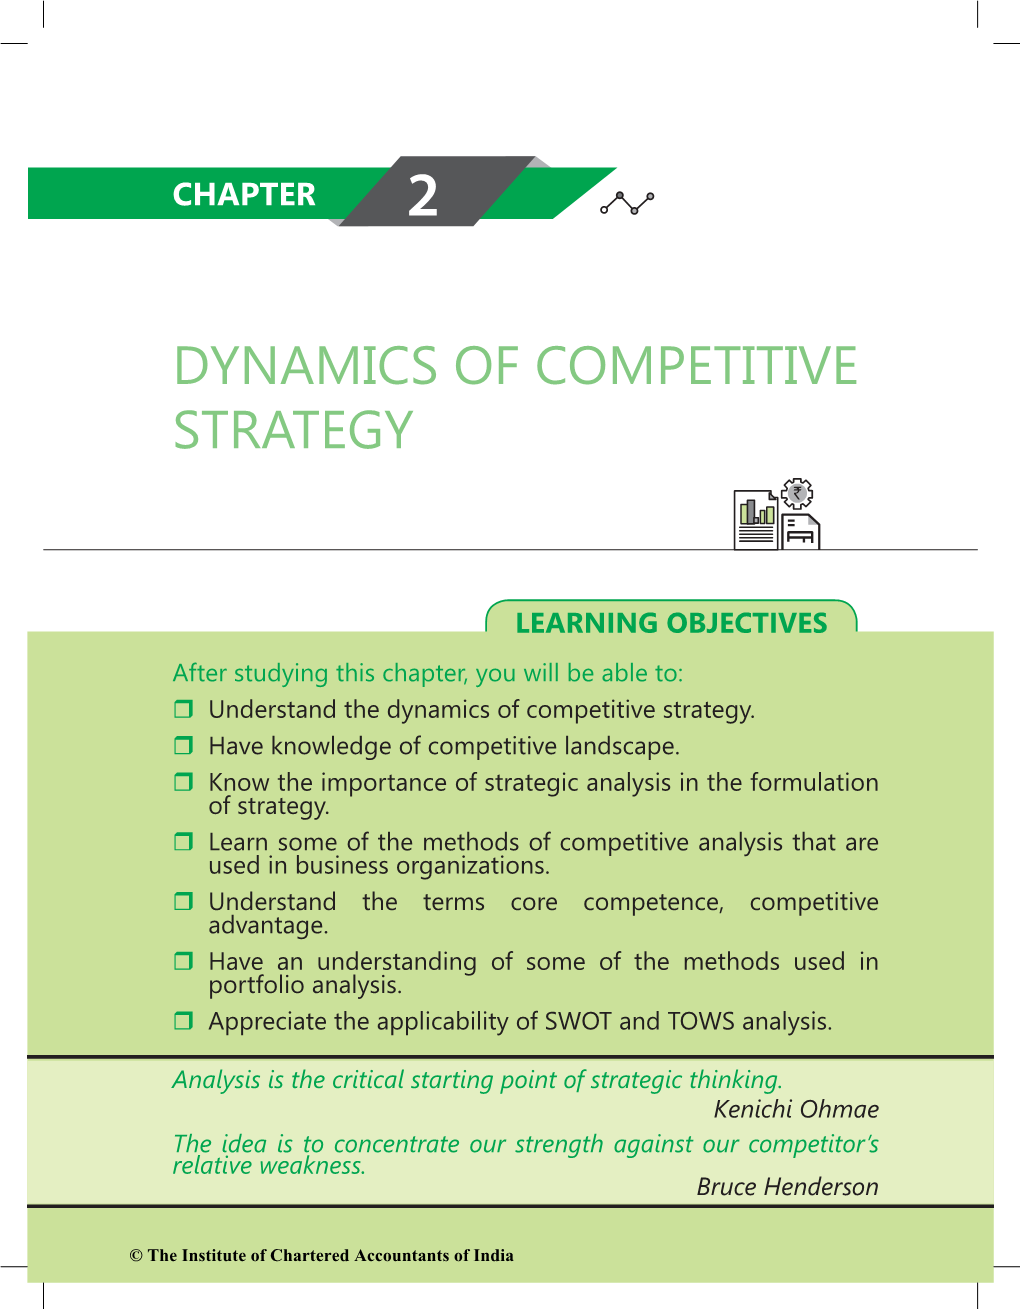 Dynamics of Competitive Strategy